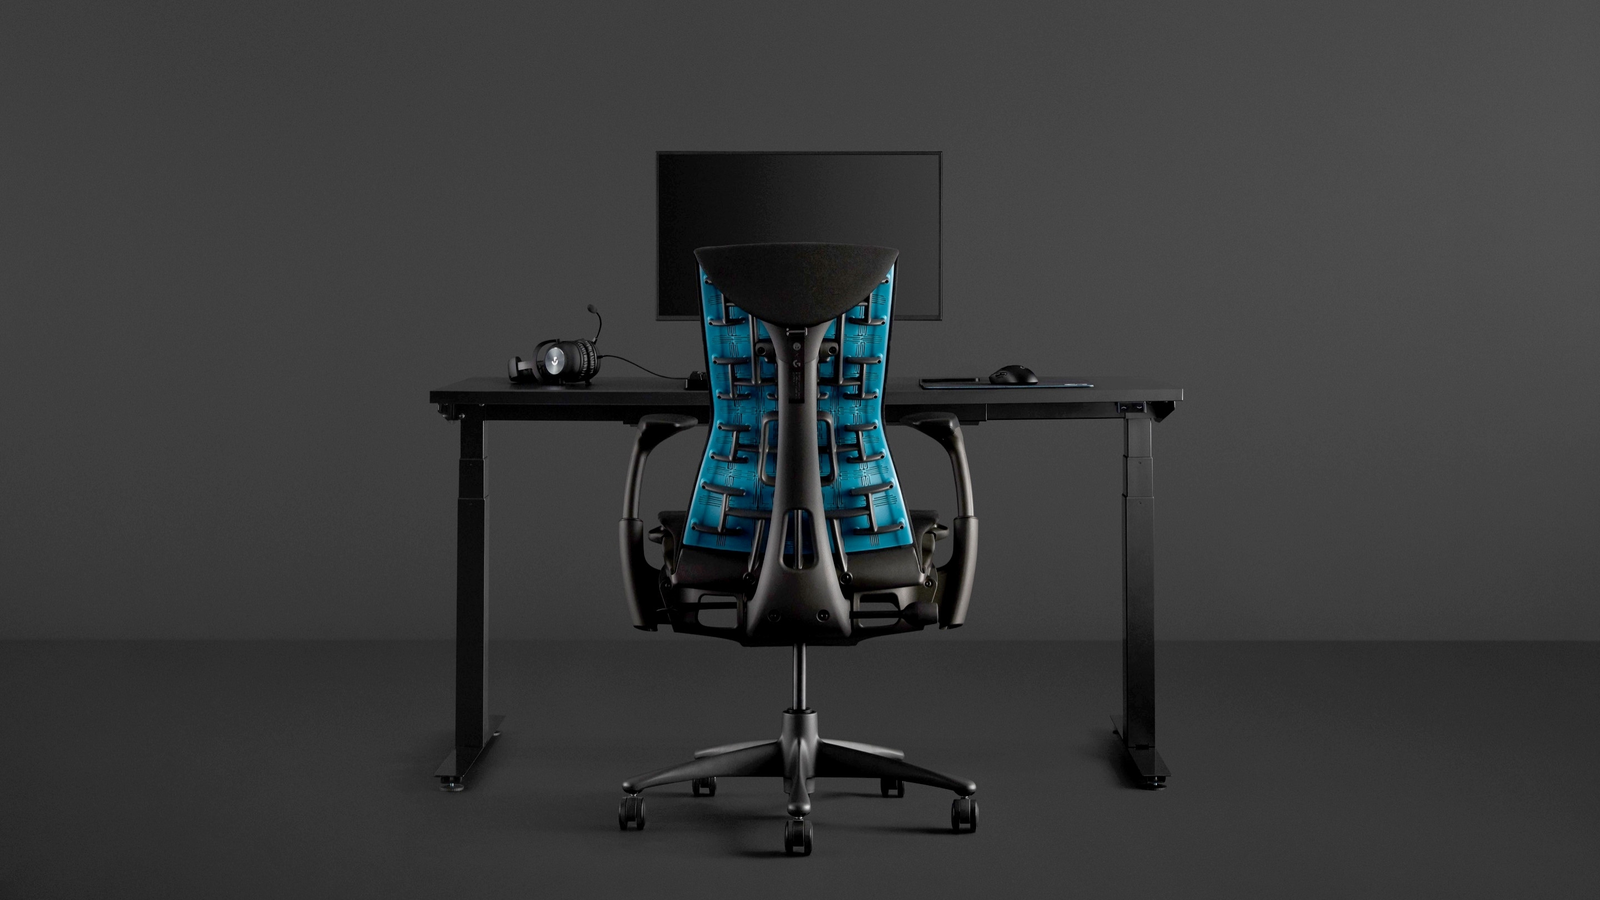 https://assetsio.reedpopcdn.com/herman-miller-x-logitech-g-embody-gaming-chair-review-1611226831531.jpg?width=1600&height=900&fit=crop&quality=100&format=png&enable=upscale&auto=webp